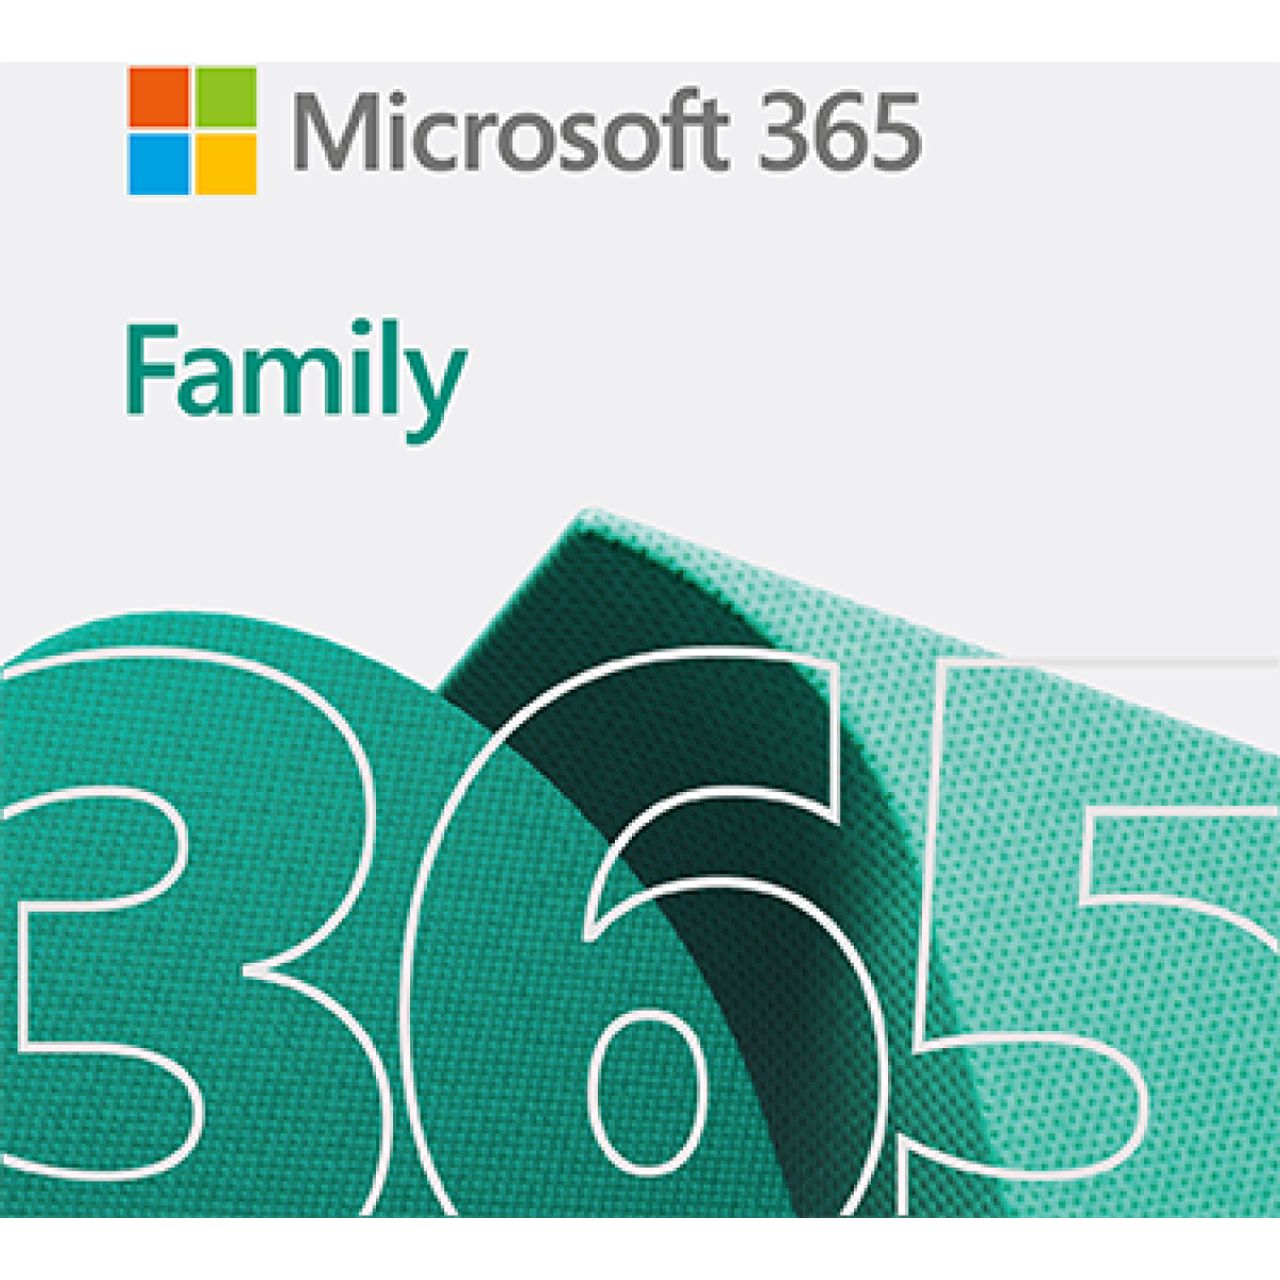 Microsoft 365 Family Digital Download 6 Users - Annual Subscription